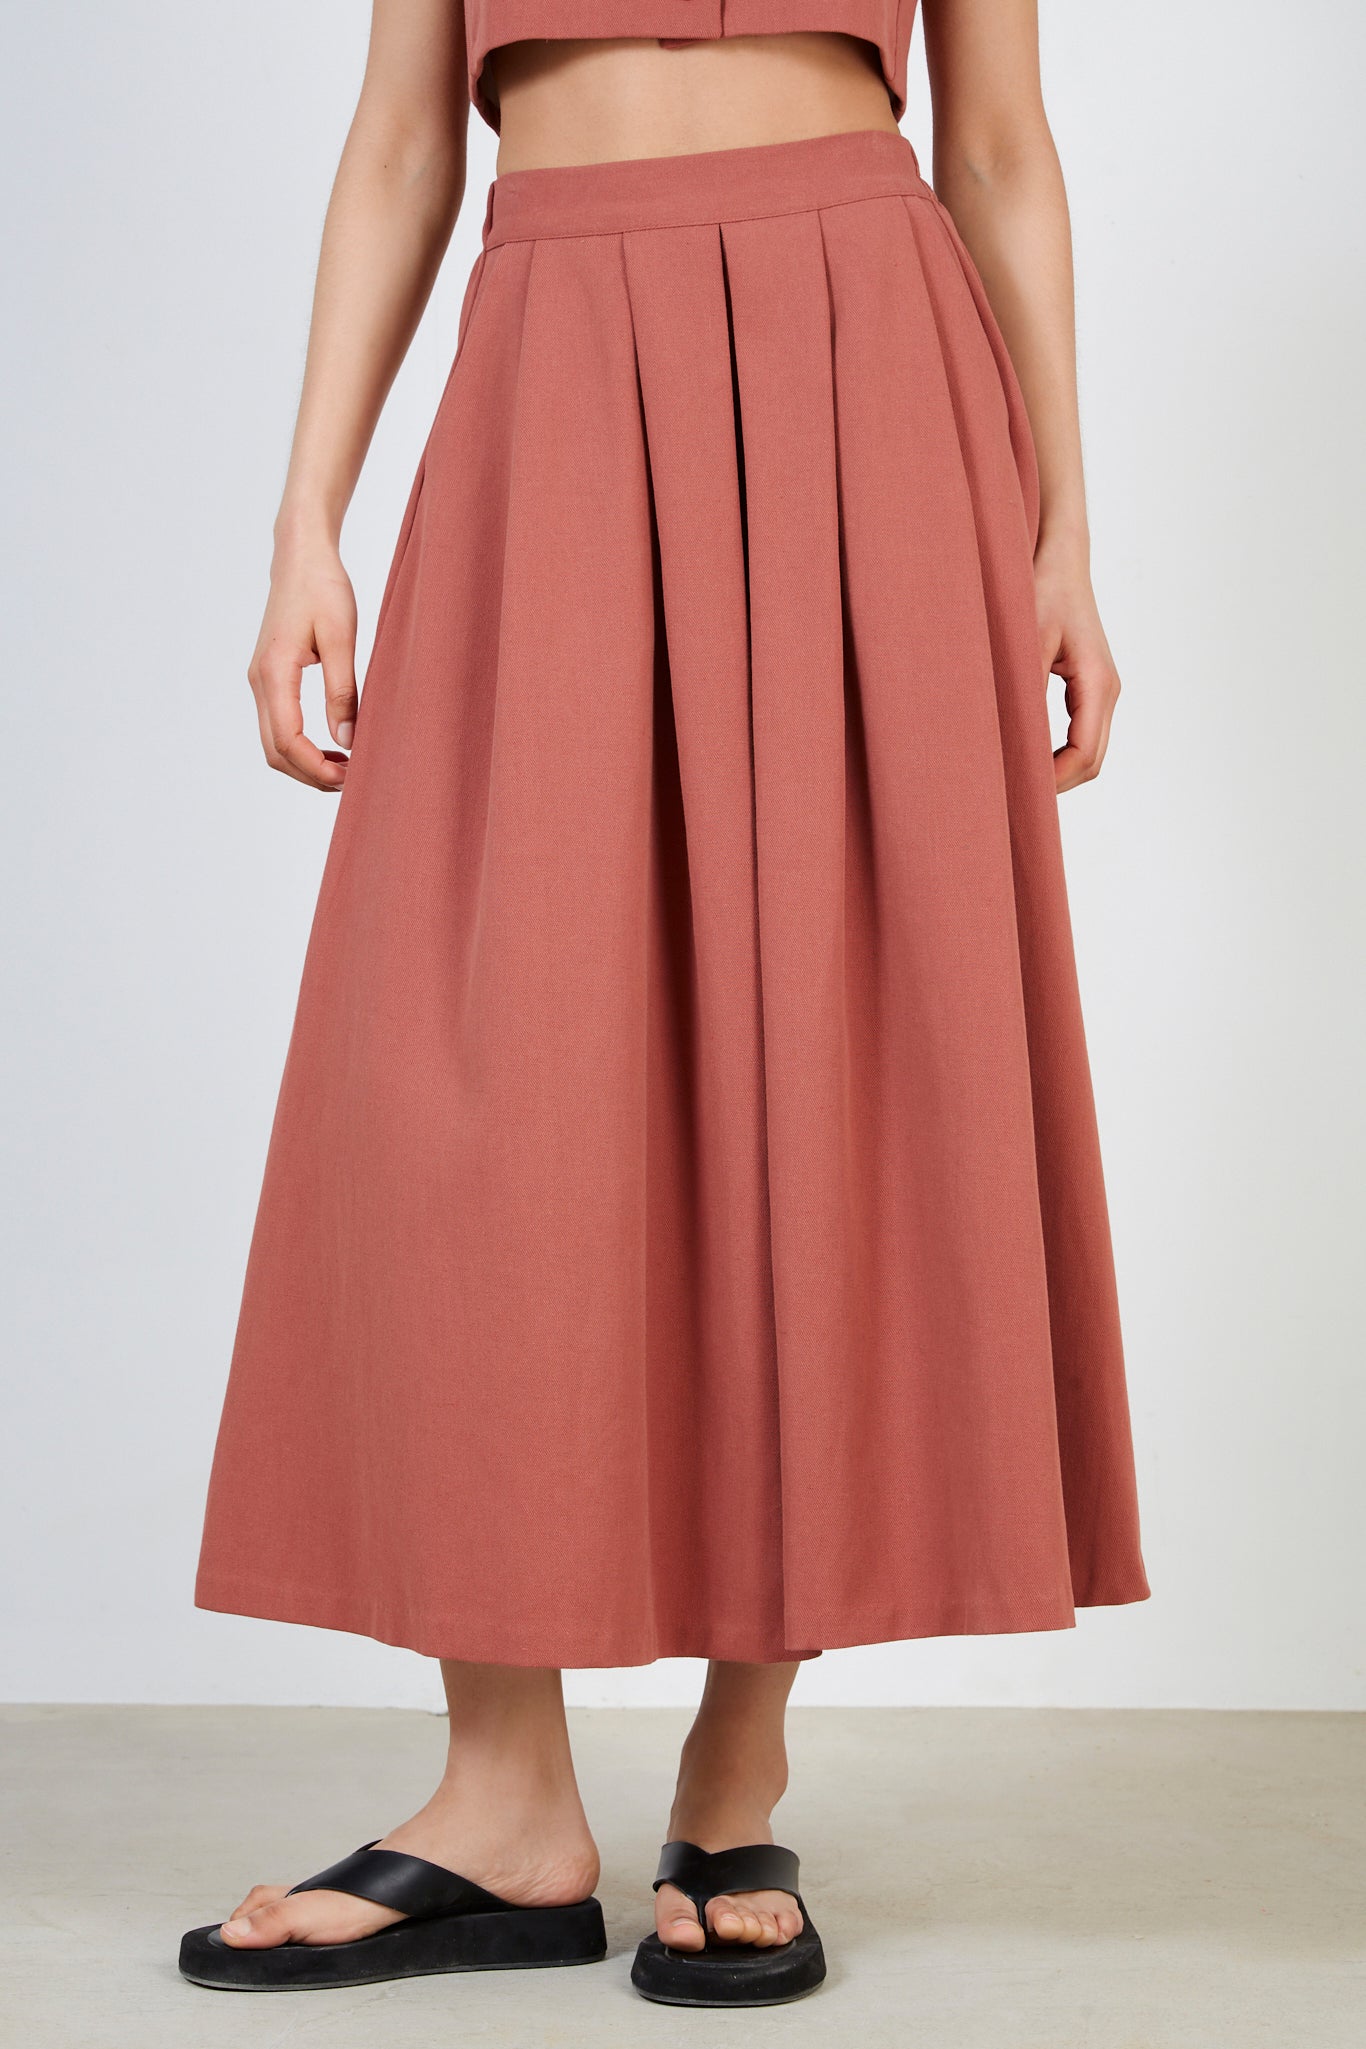 Rust red pleated skirt